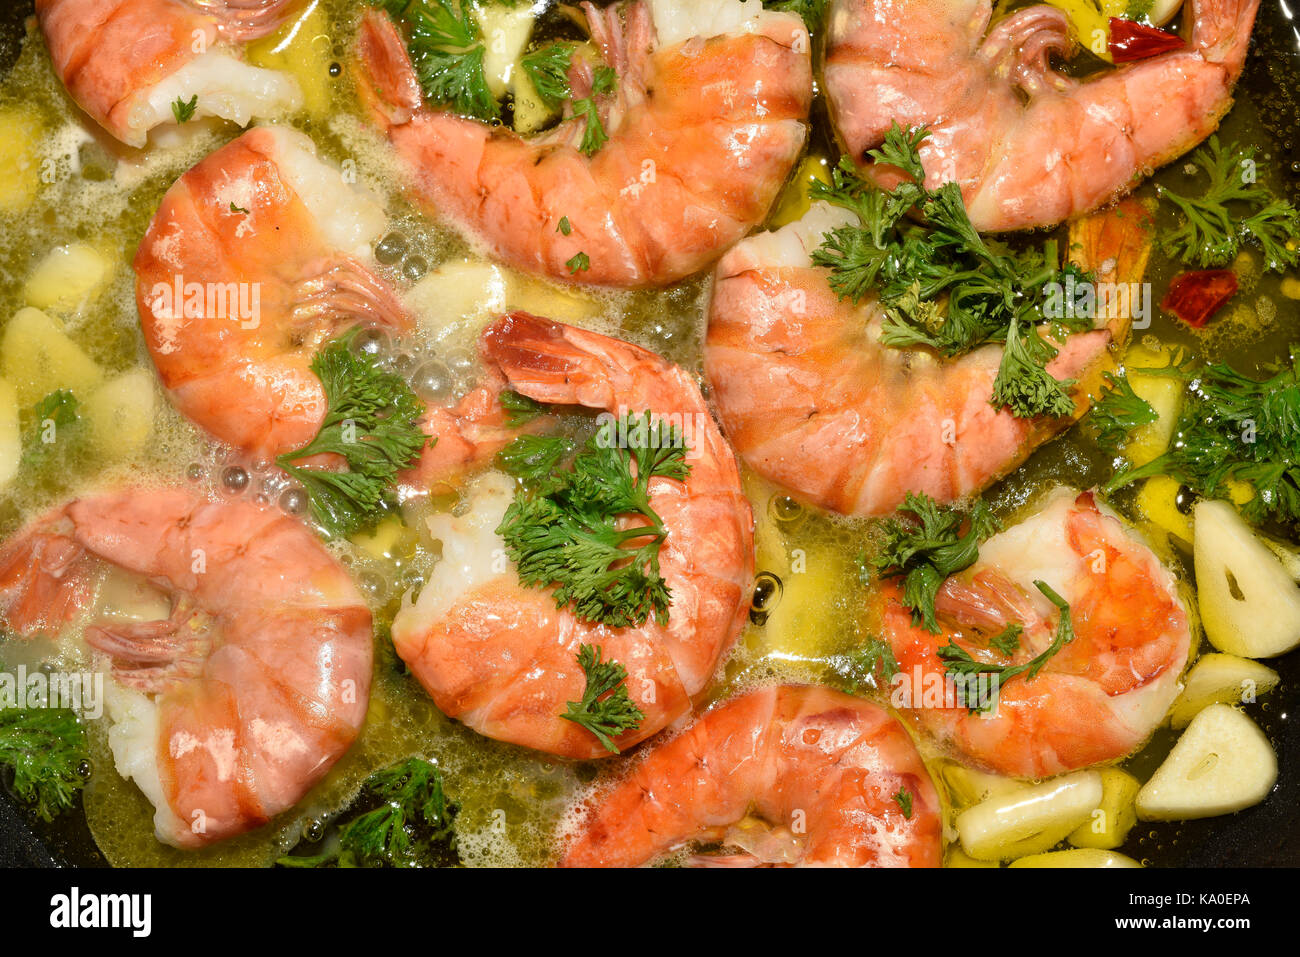 King prawns, tiger shrimps, with garlic and parsley in a pan, Canary Islands, Spain Stock Photo